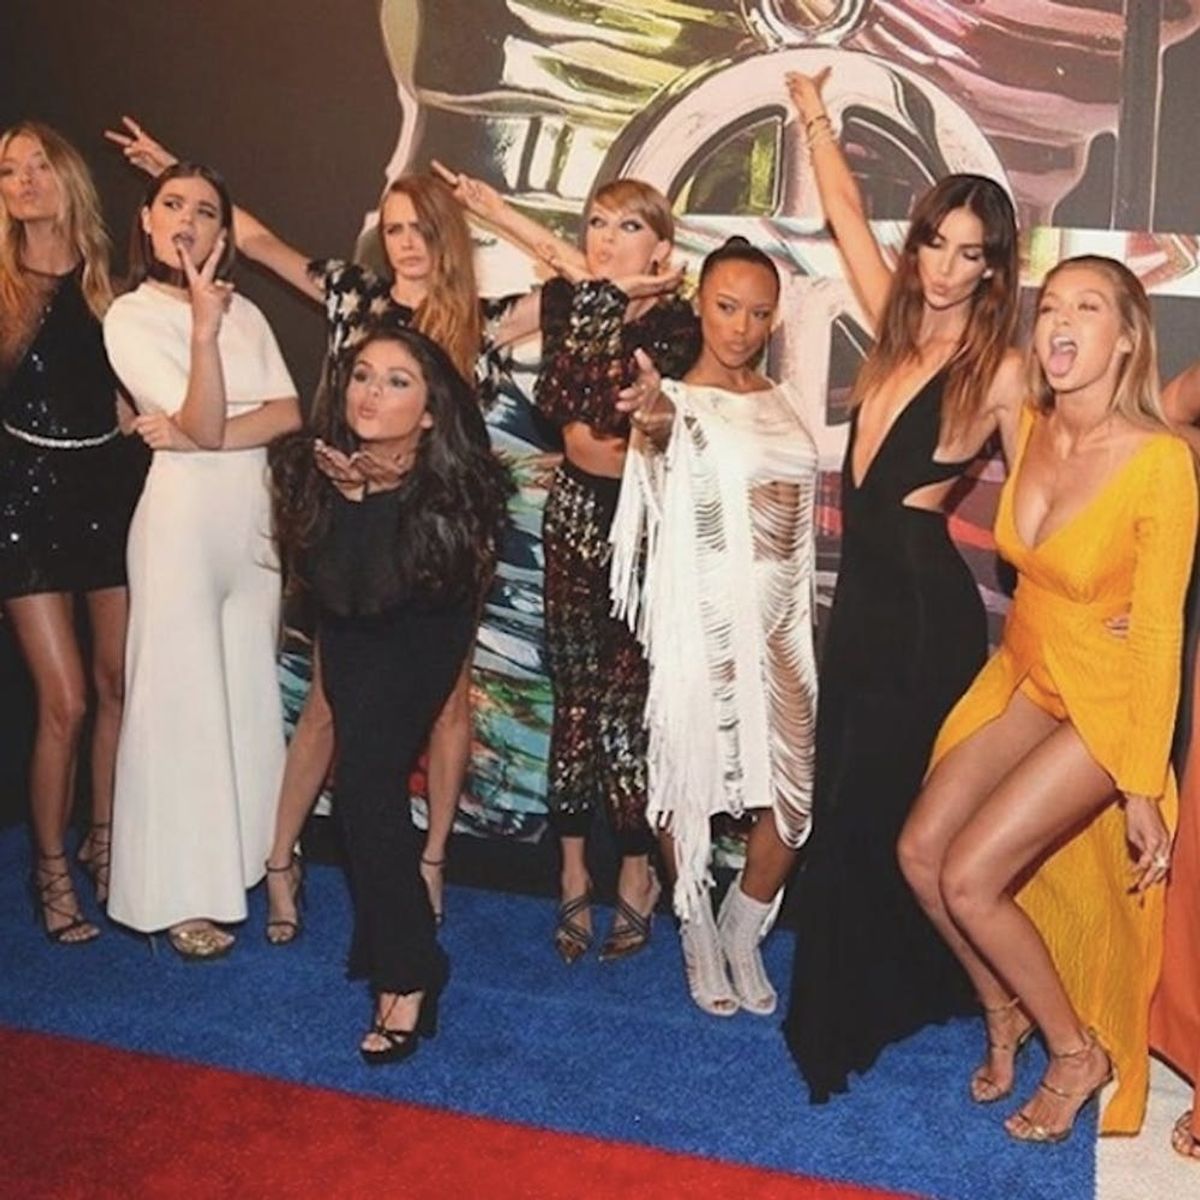 11 Behind-the-Scenes Instagrams That Sum Up the VMAs